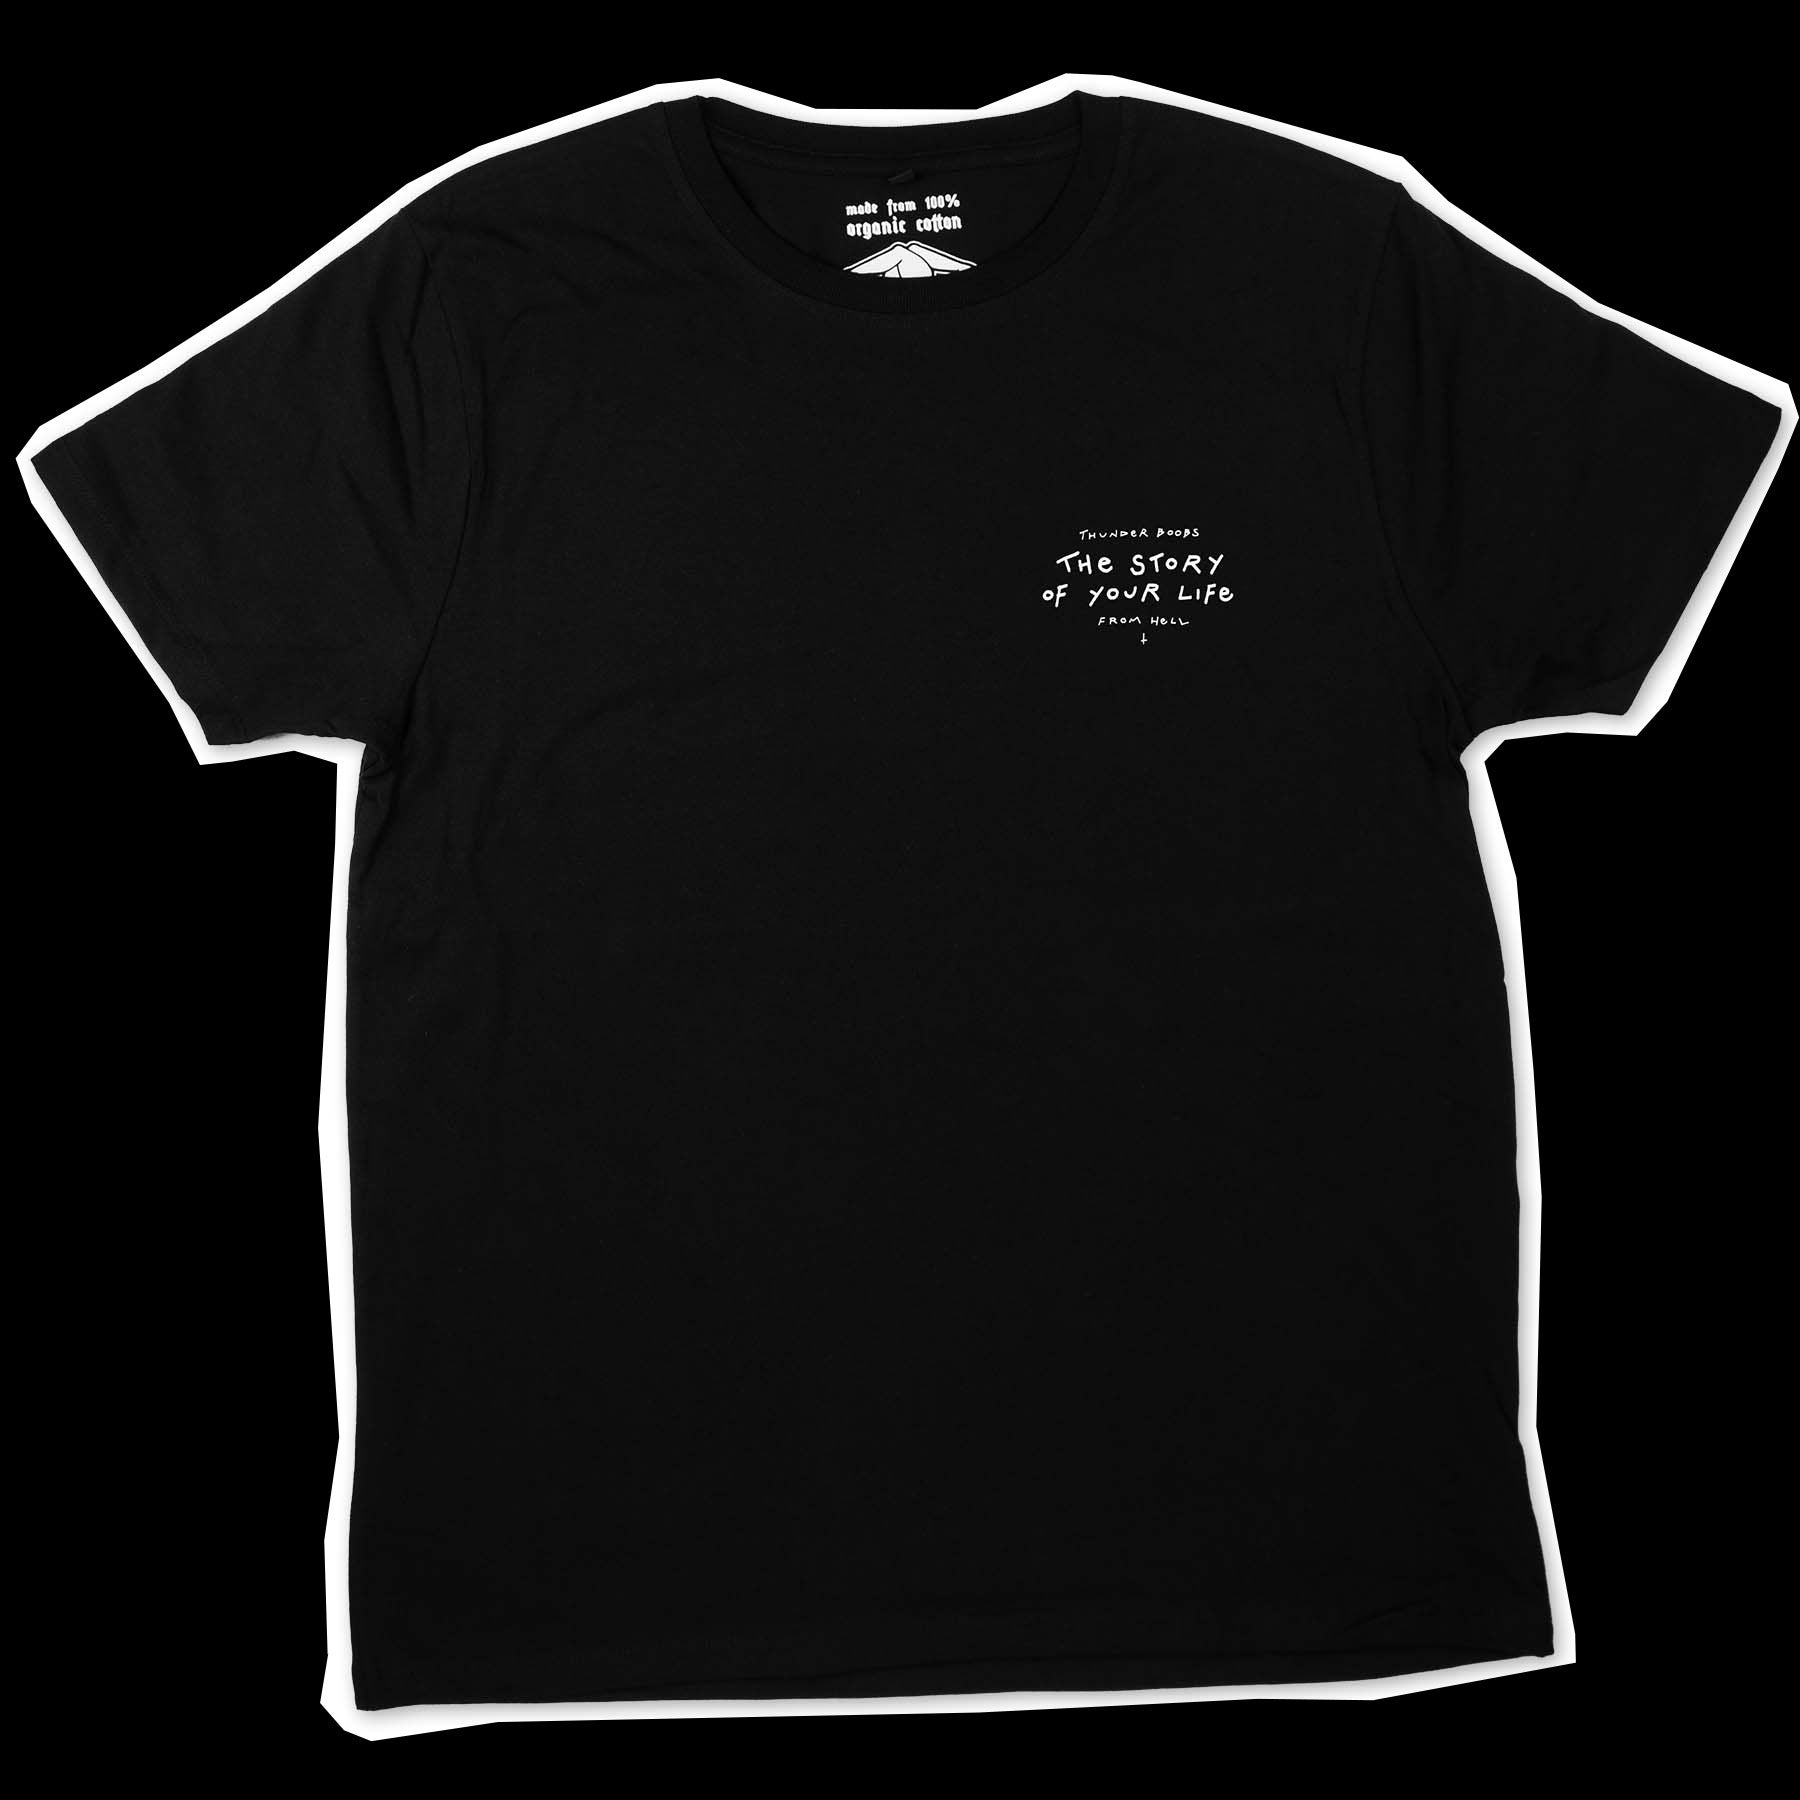 Black t-shirt with a white text which says "the story of your life" and "thunder boobs from hell"